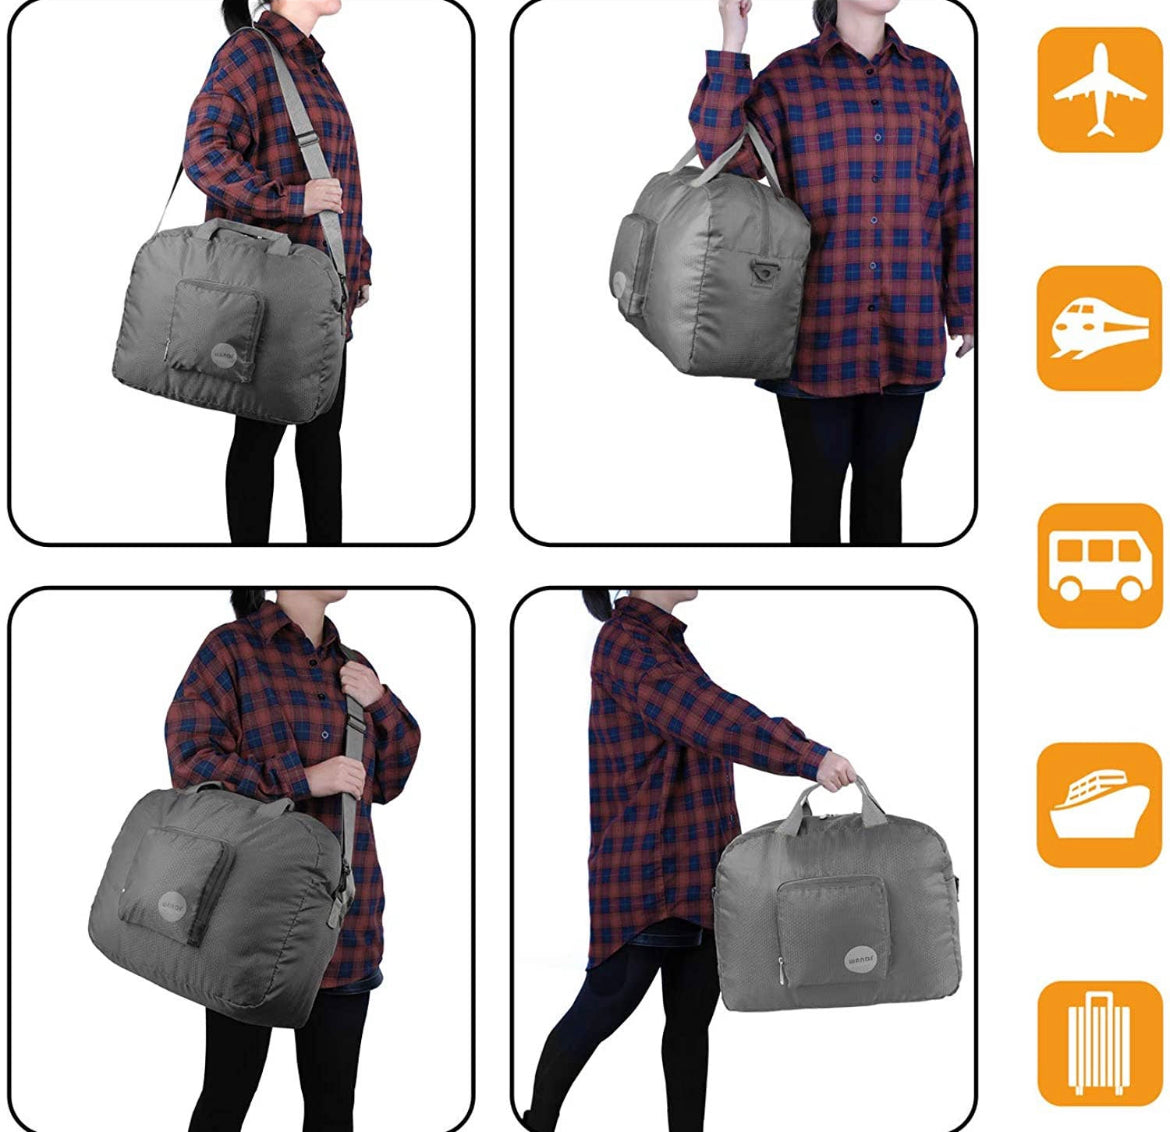 On Sale- Packable/Foldable Carry-On Duffle Bag 16"